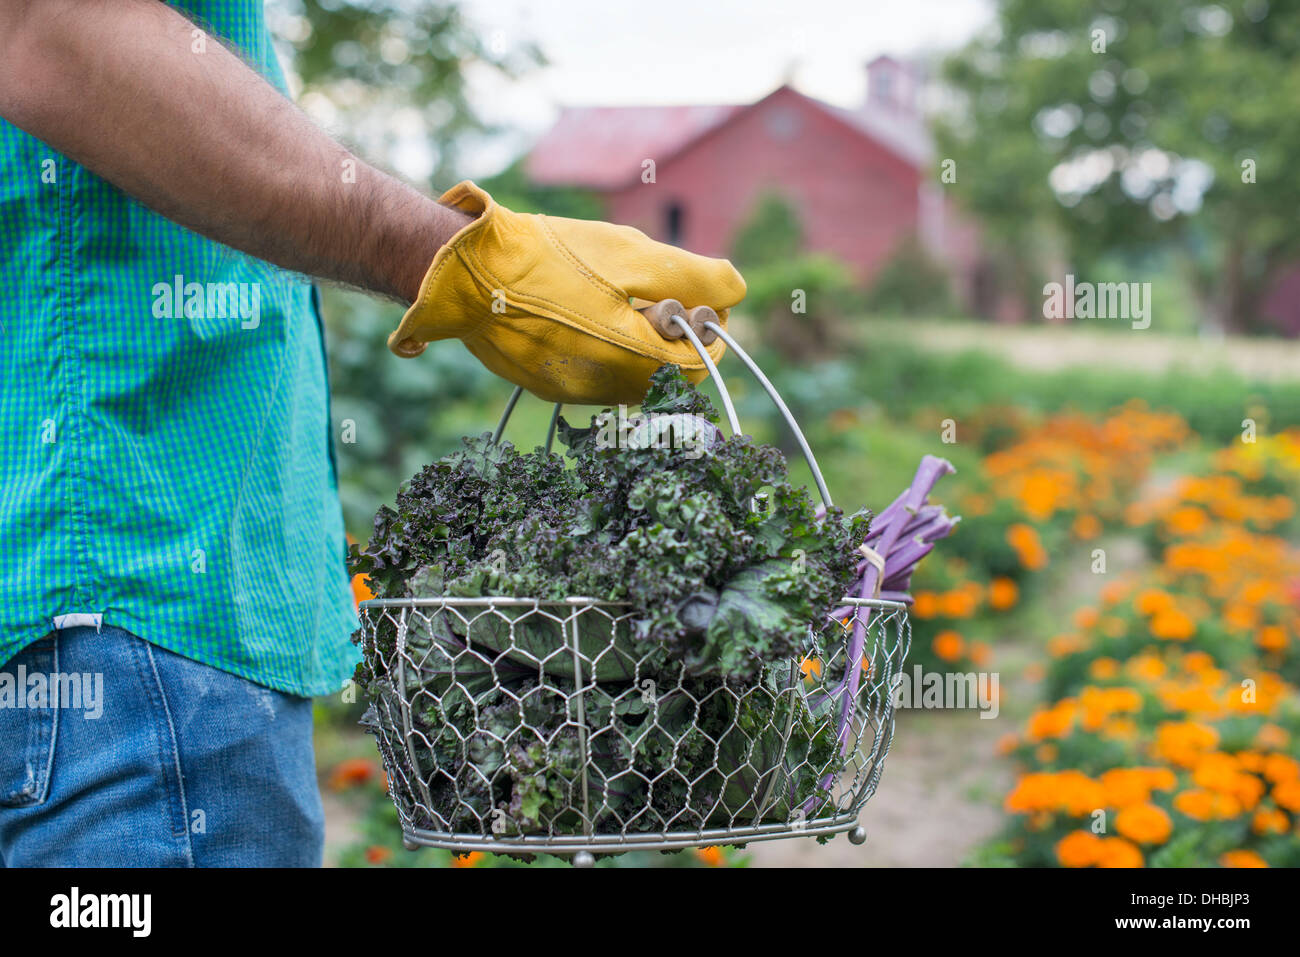 An organic vegetable garden on a farm. A man carrying a basket of freshly harvested green leaf crop. Stock Photo